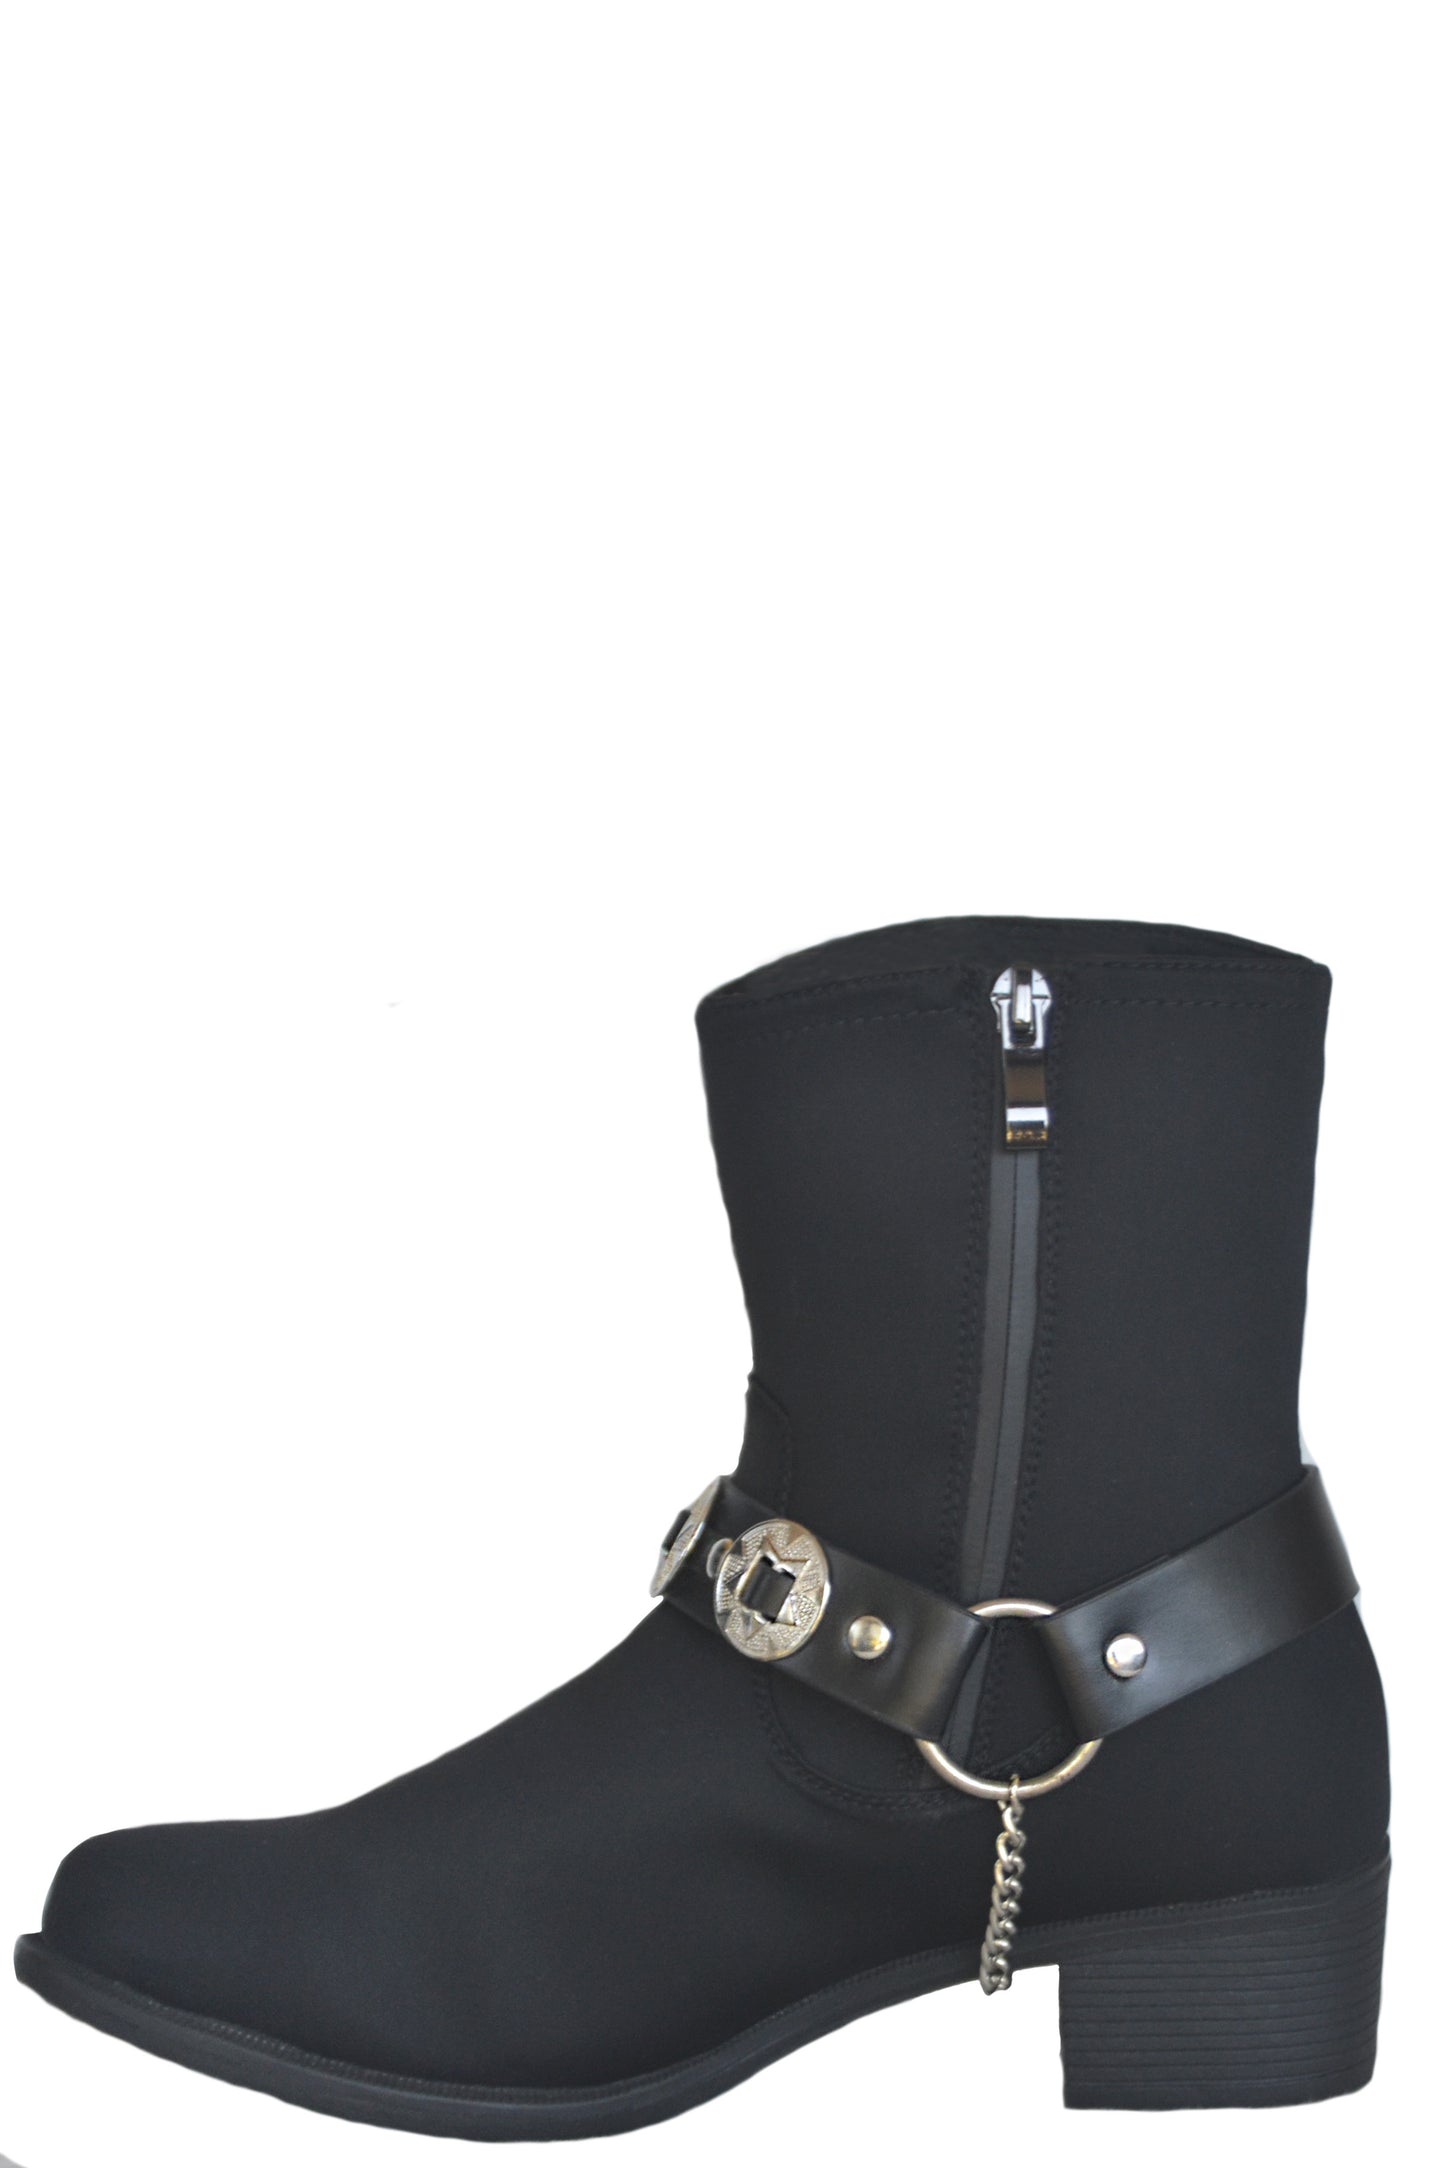 MANHATTAN BREATHABLE WATERPROOF MID-HEIGHT NYLON BOOT WITH CONCHO BELT